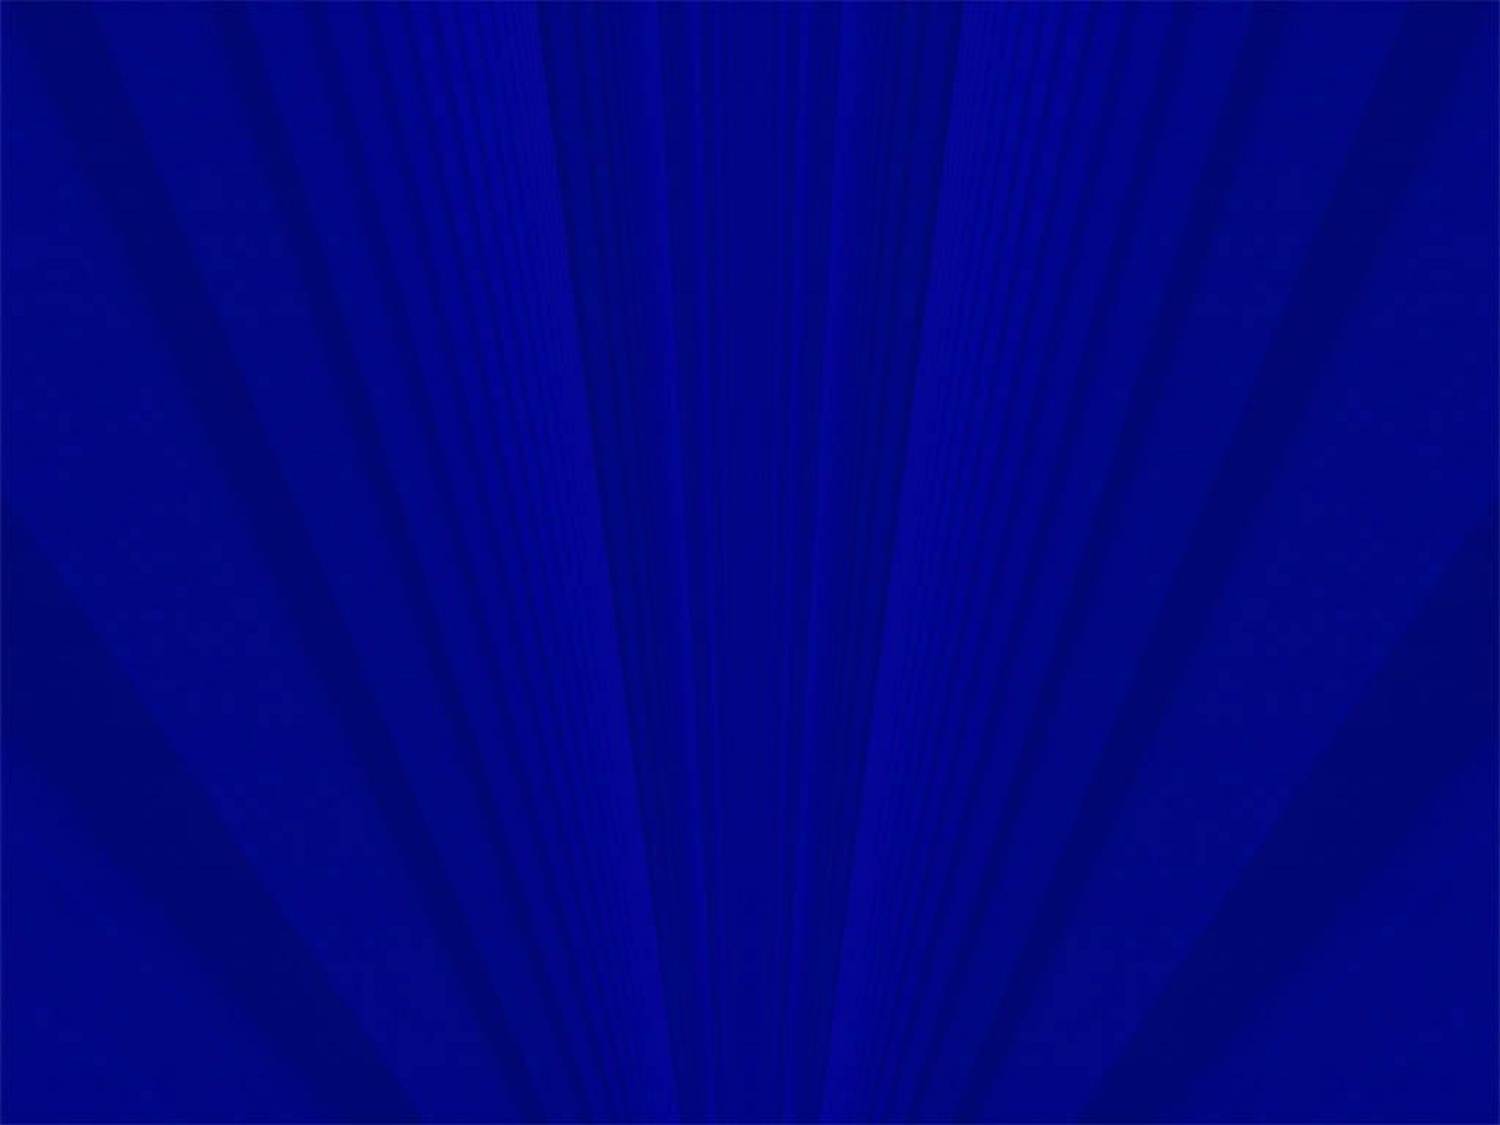 Royal Blue Spot Light Powerpoint Background Template By Misspowerpoint